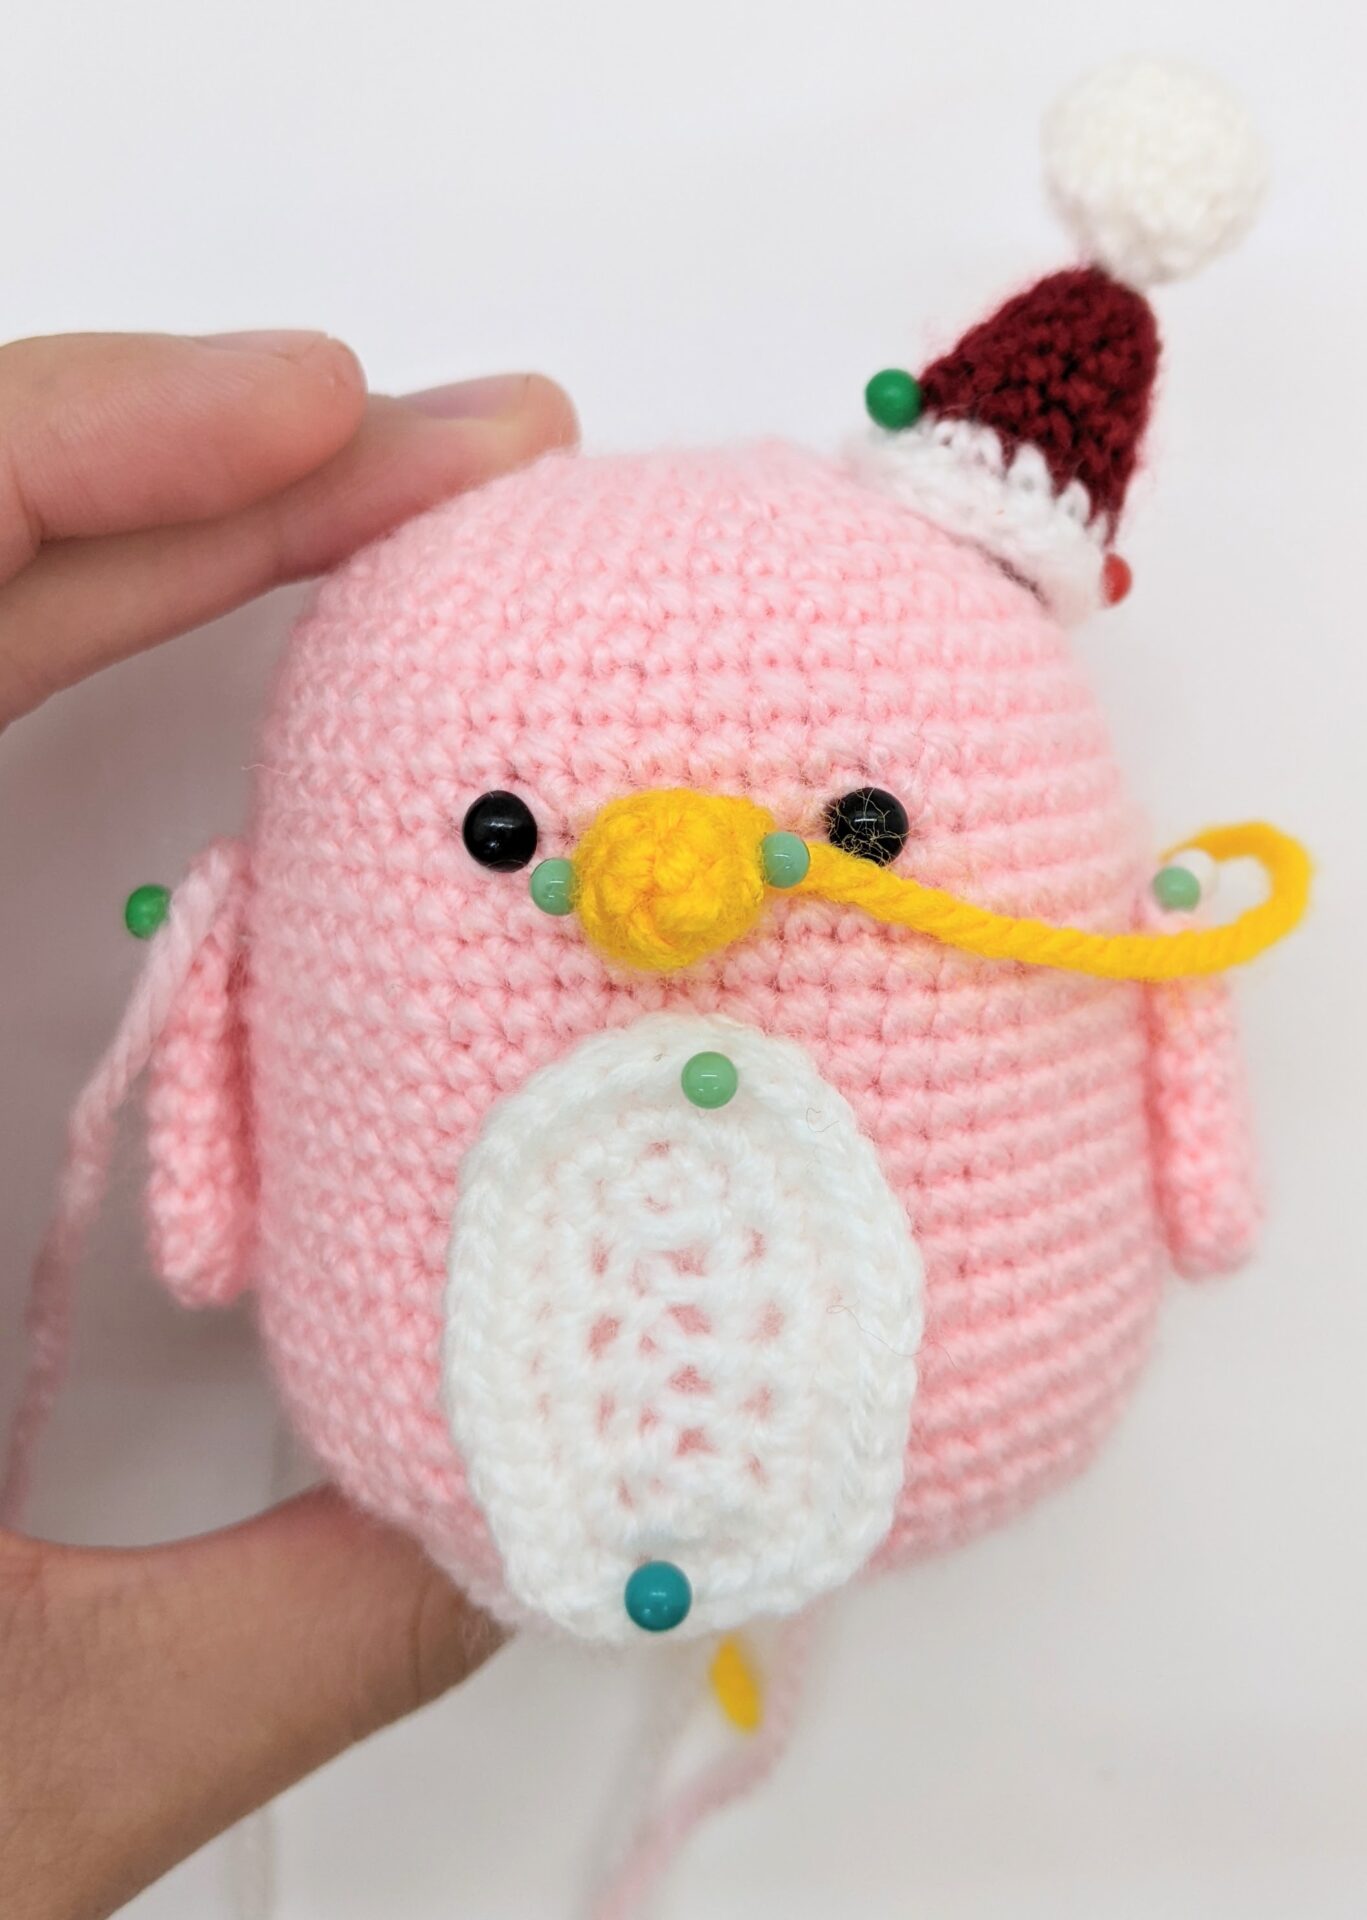 Amigurumi Tools and Materials: All You Need to Get Started - Cuddly  Stitches Craft